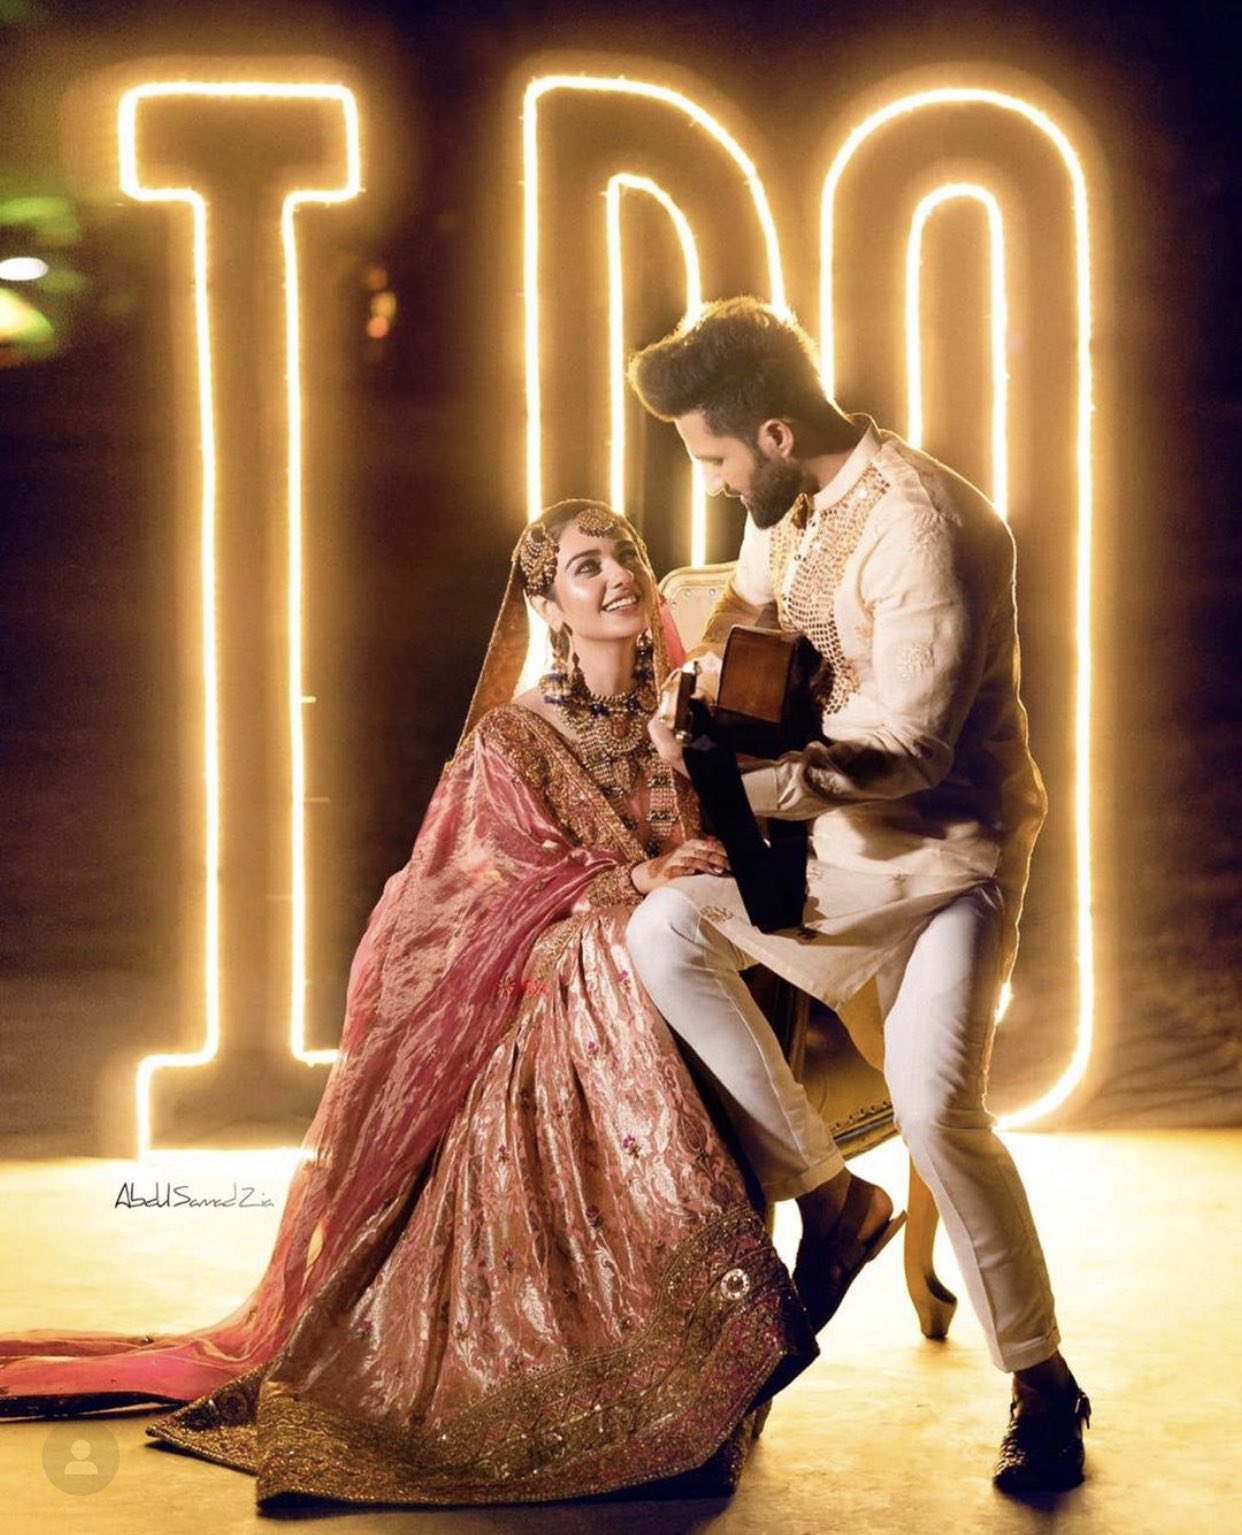 Unique Color Coordinated Pakistani Couples To Take Inspirations From!